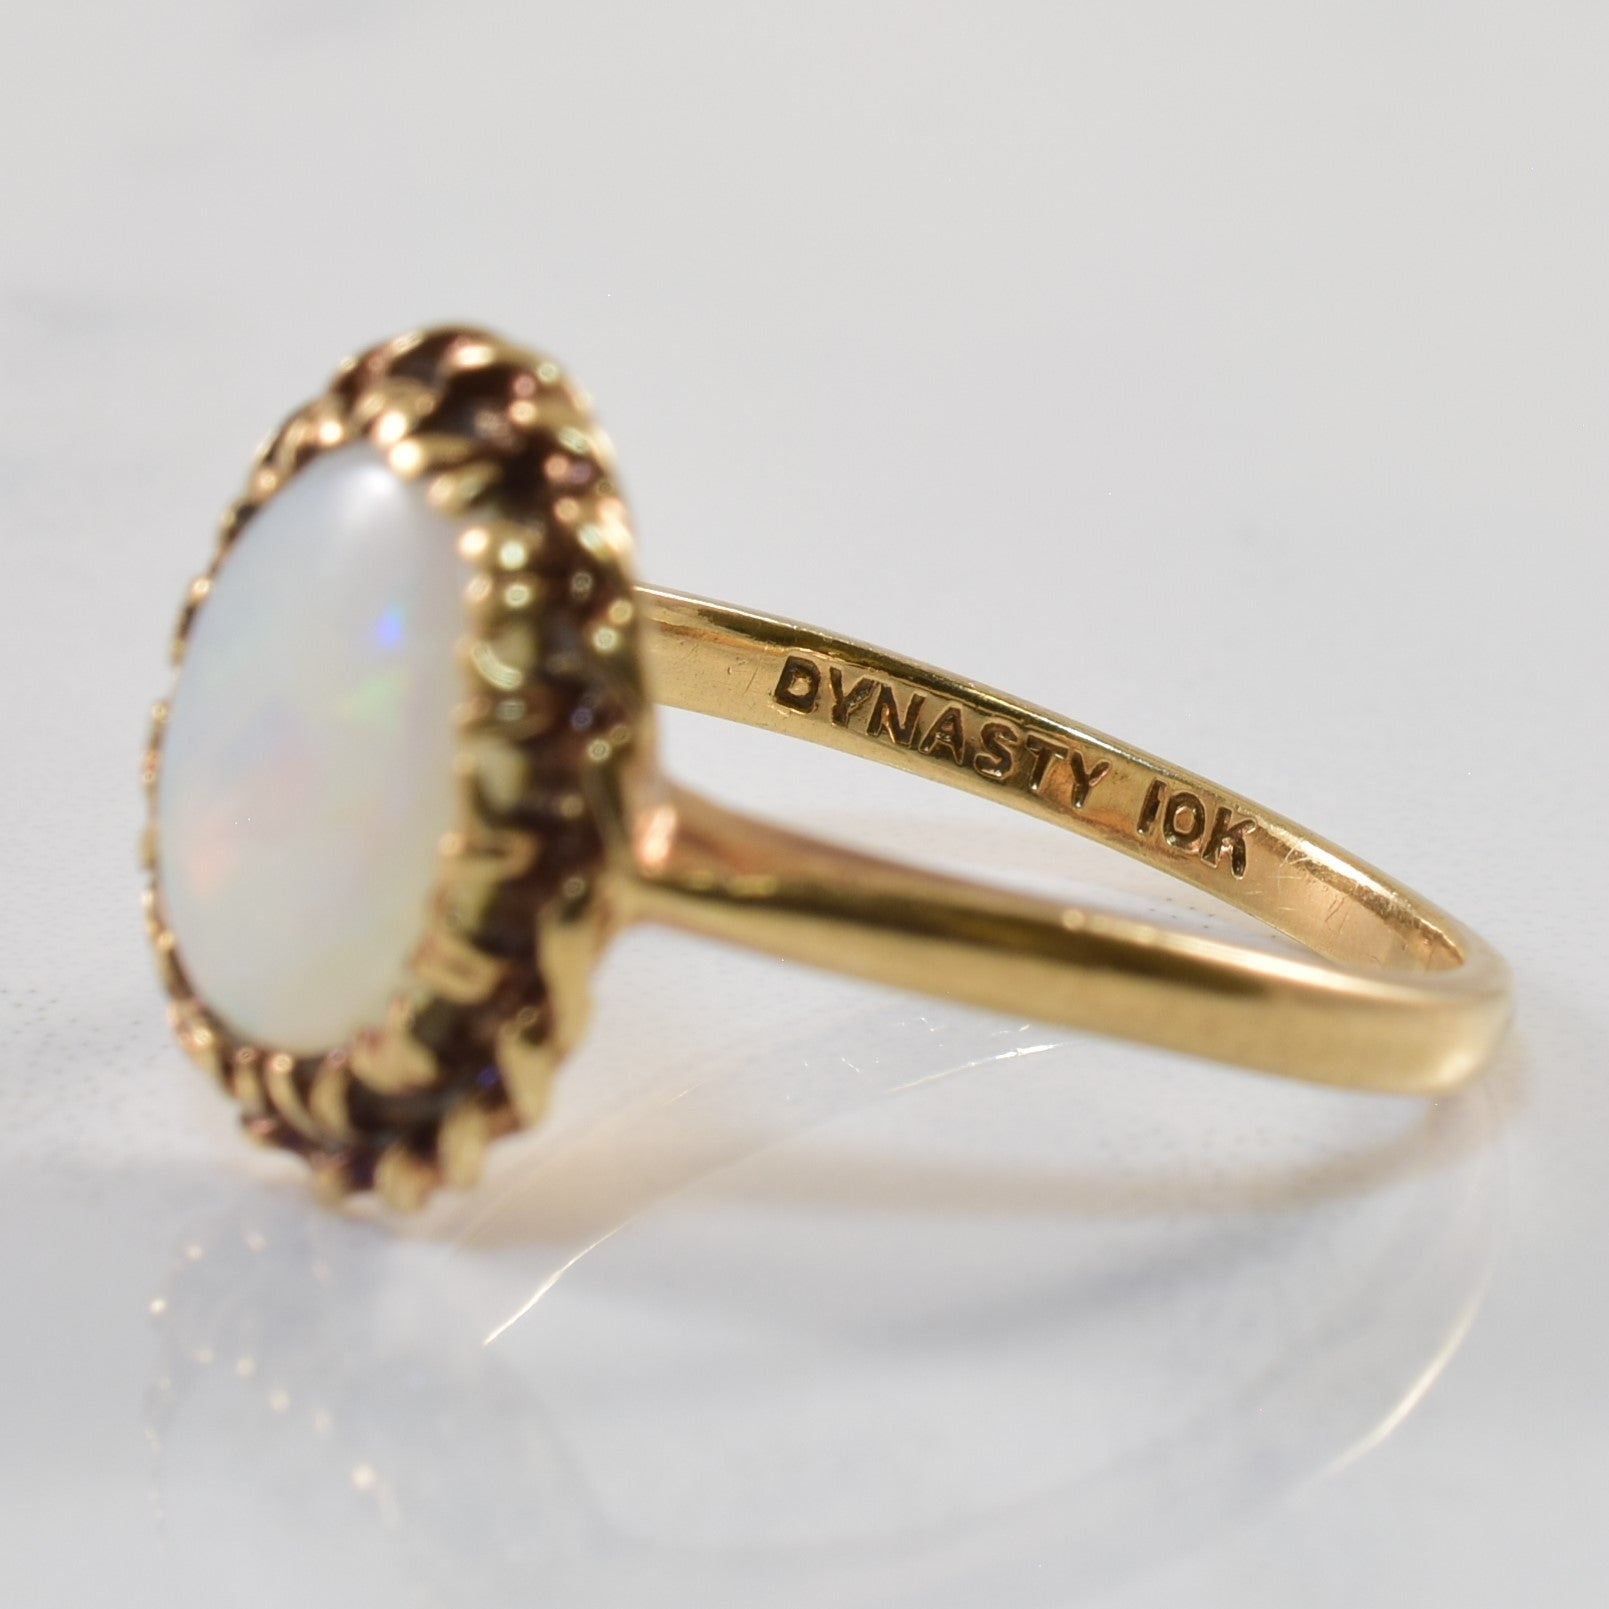 Golden Halo Solitaire Opal Ring | 1.00ct | SZ 6.25 |